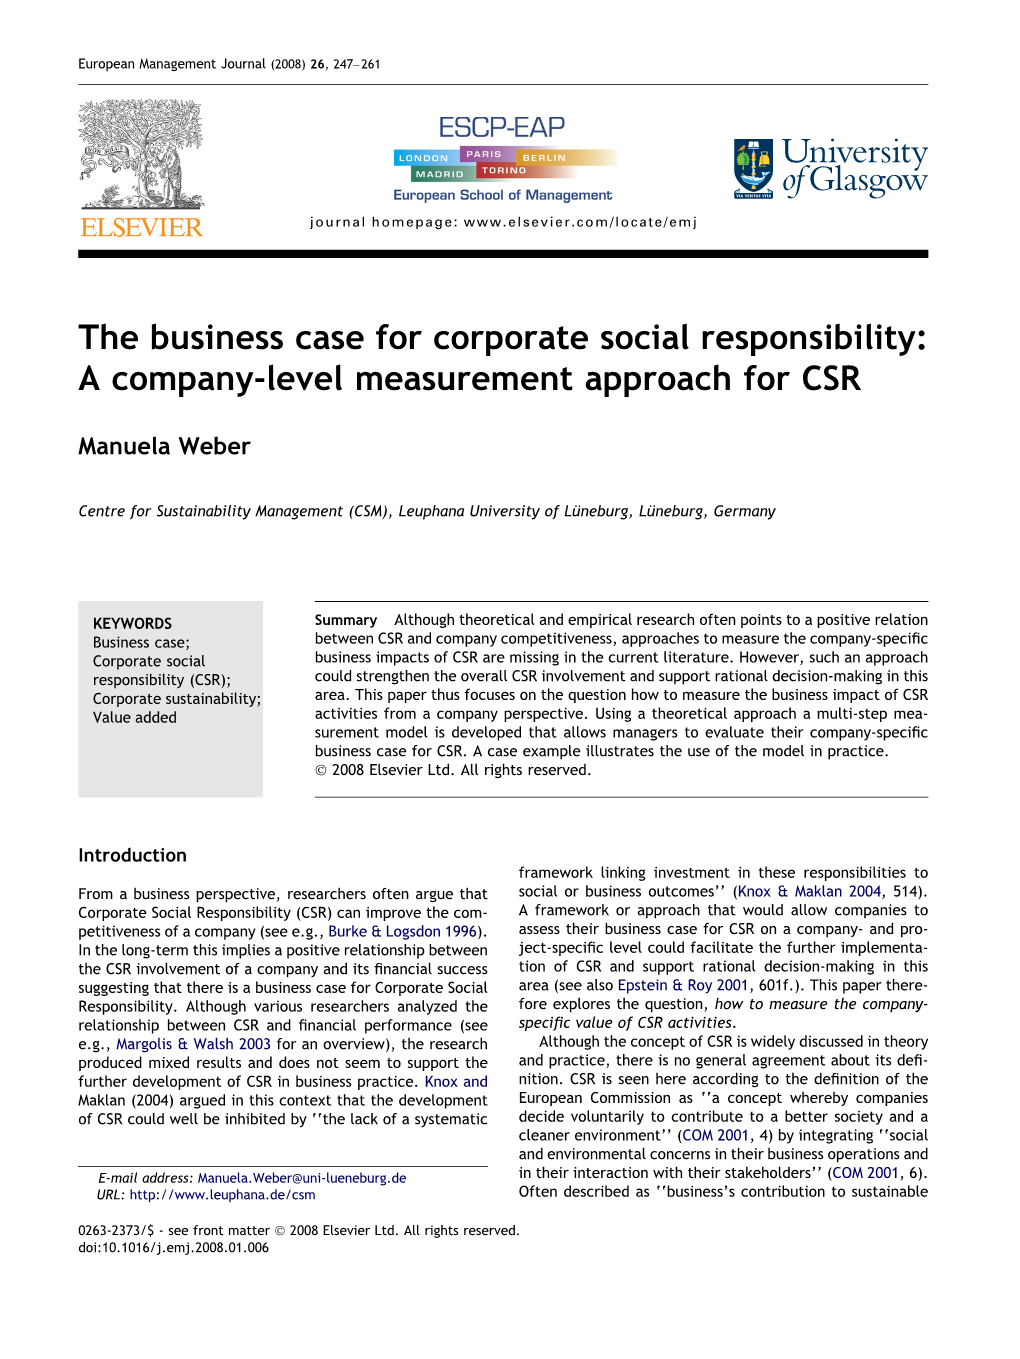 The Business Case for Corporate Social Responsibility: a Company-Level Measurement Approach for CSR